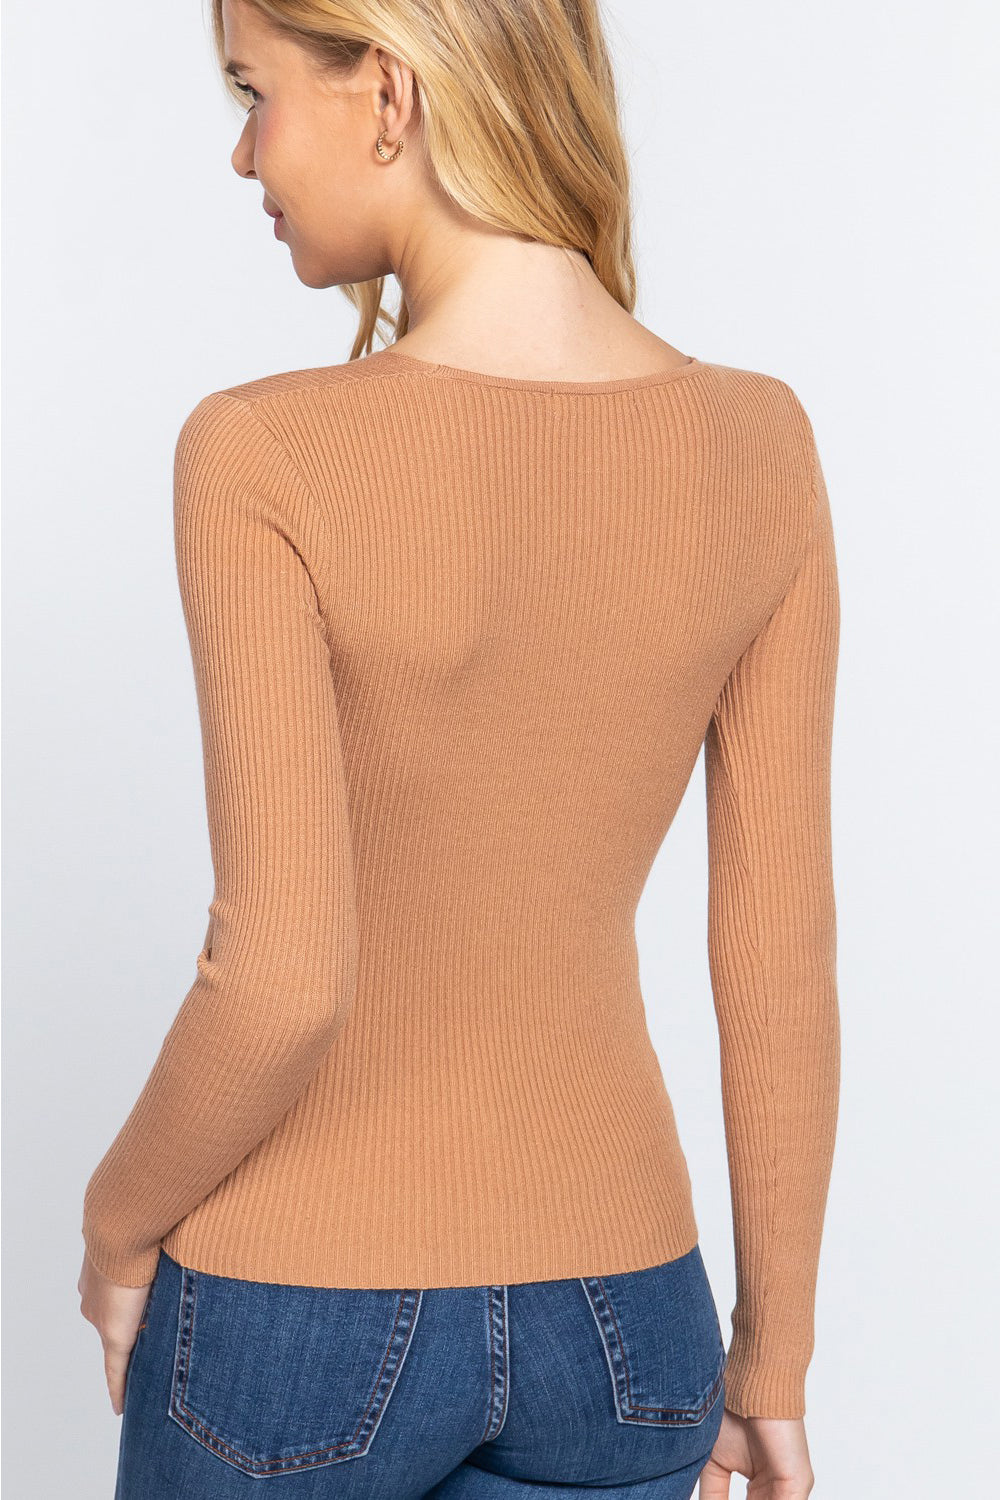 Women's V-Neck Fitted Viscose Rib Knit Top | Knit Tops | Ro + Ivy